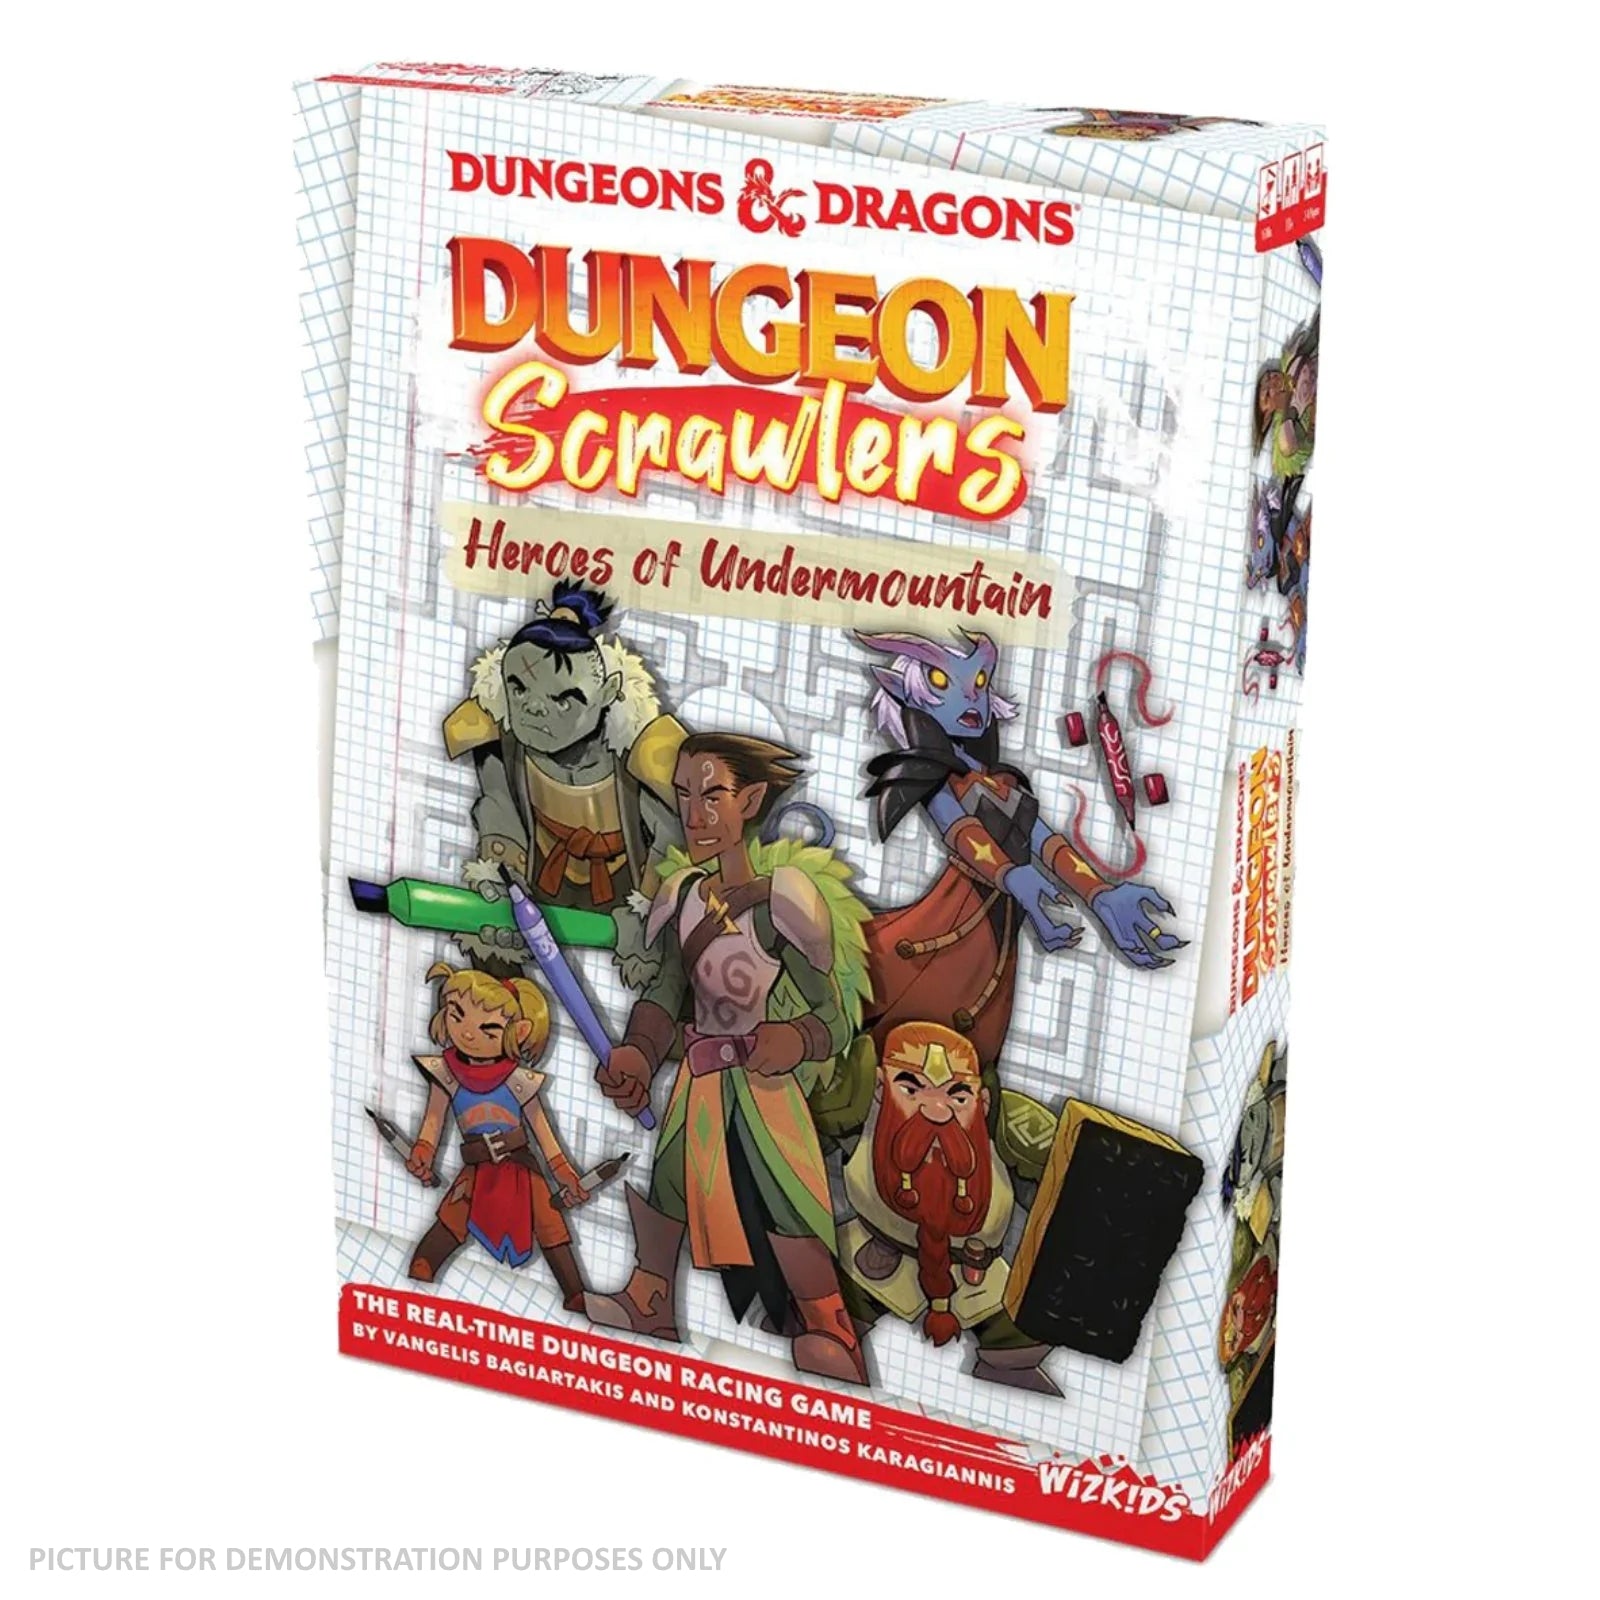 Dungeons & Dragons - Dungeon Scrawlers - Heroes of the Undermountain